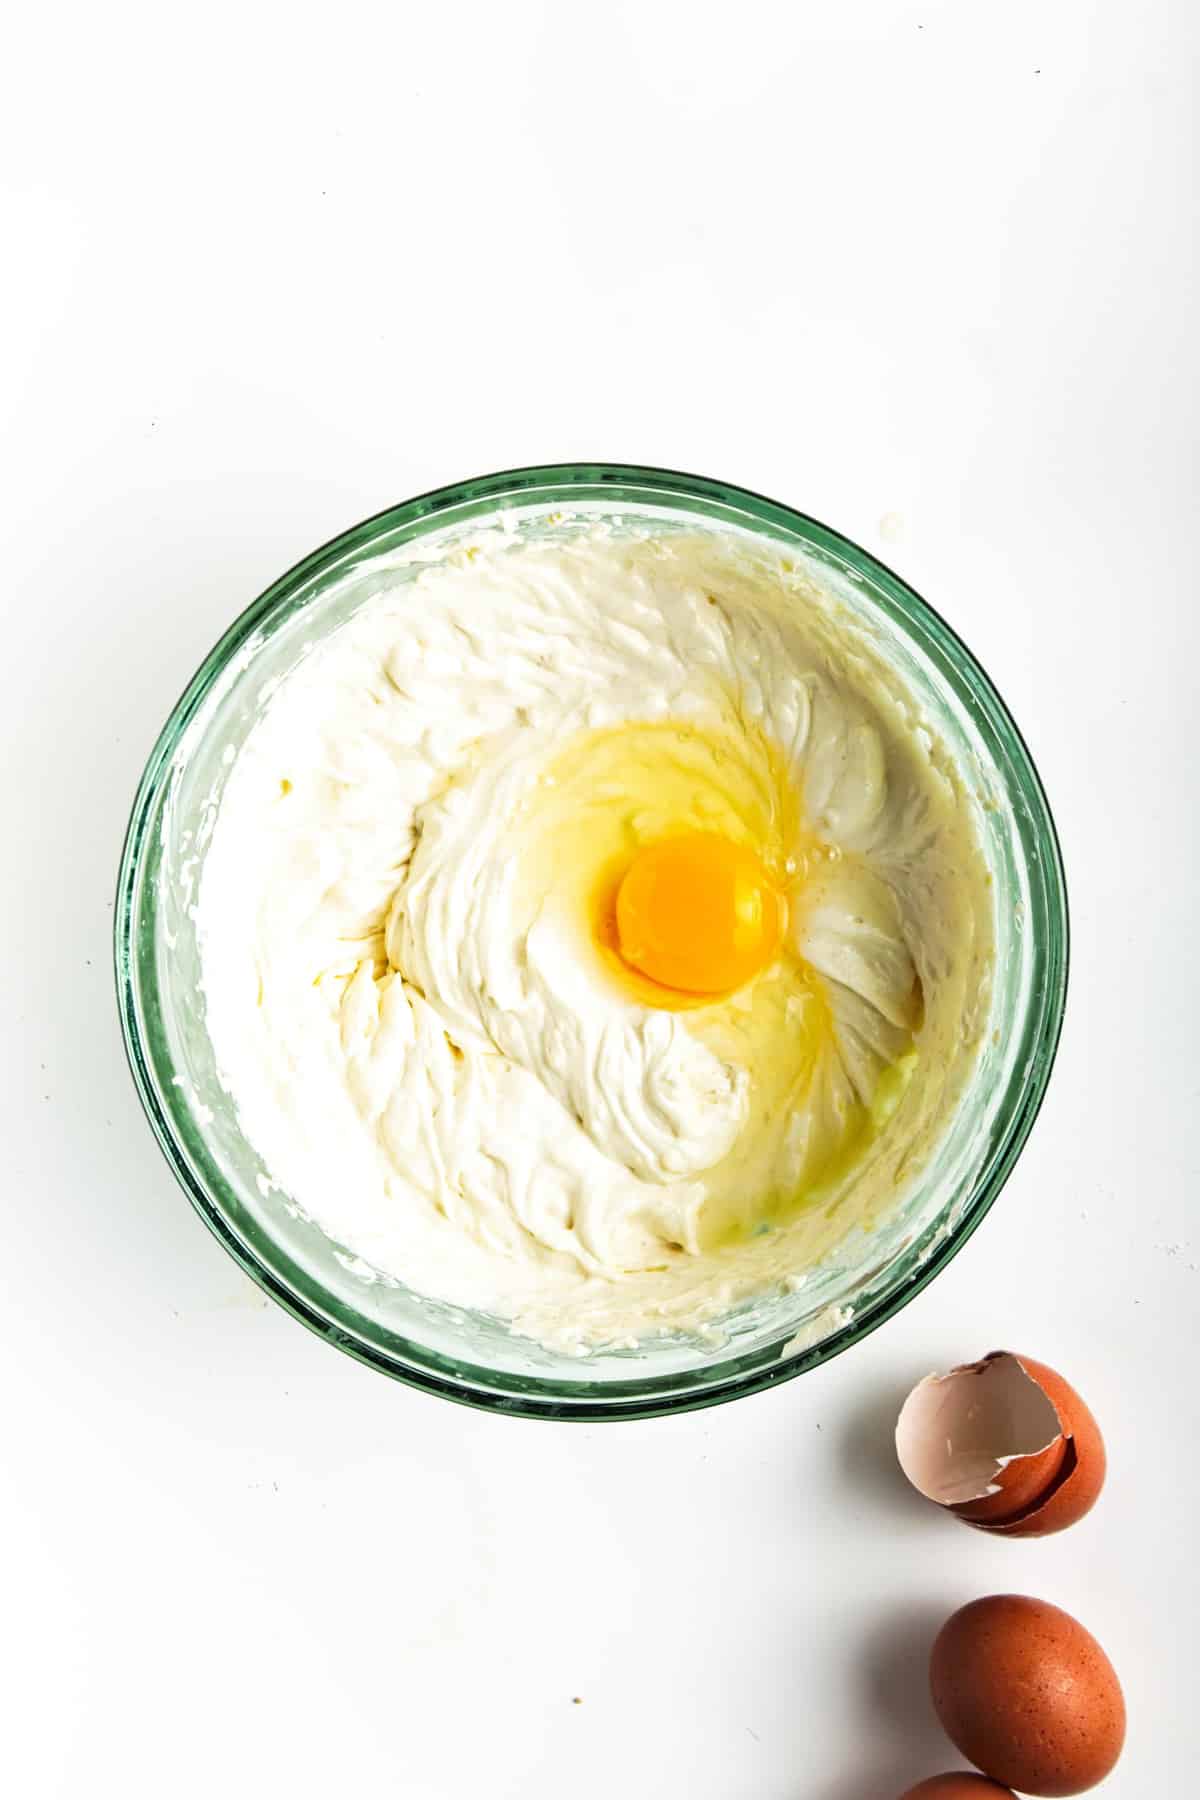 Cream cheese mixture in glass bowl with egg.